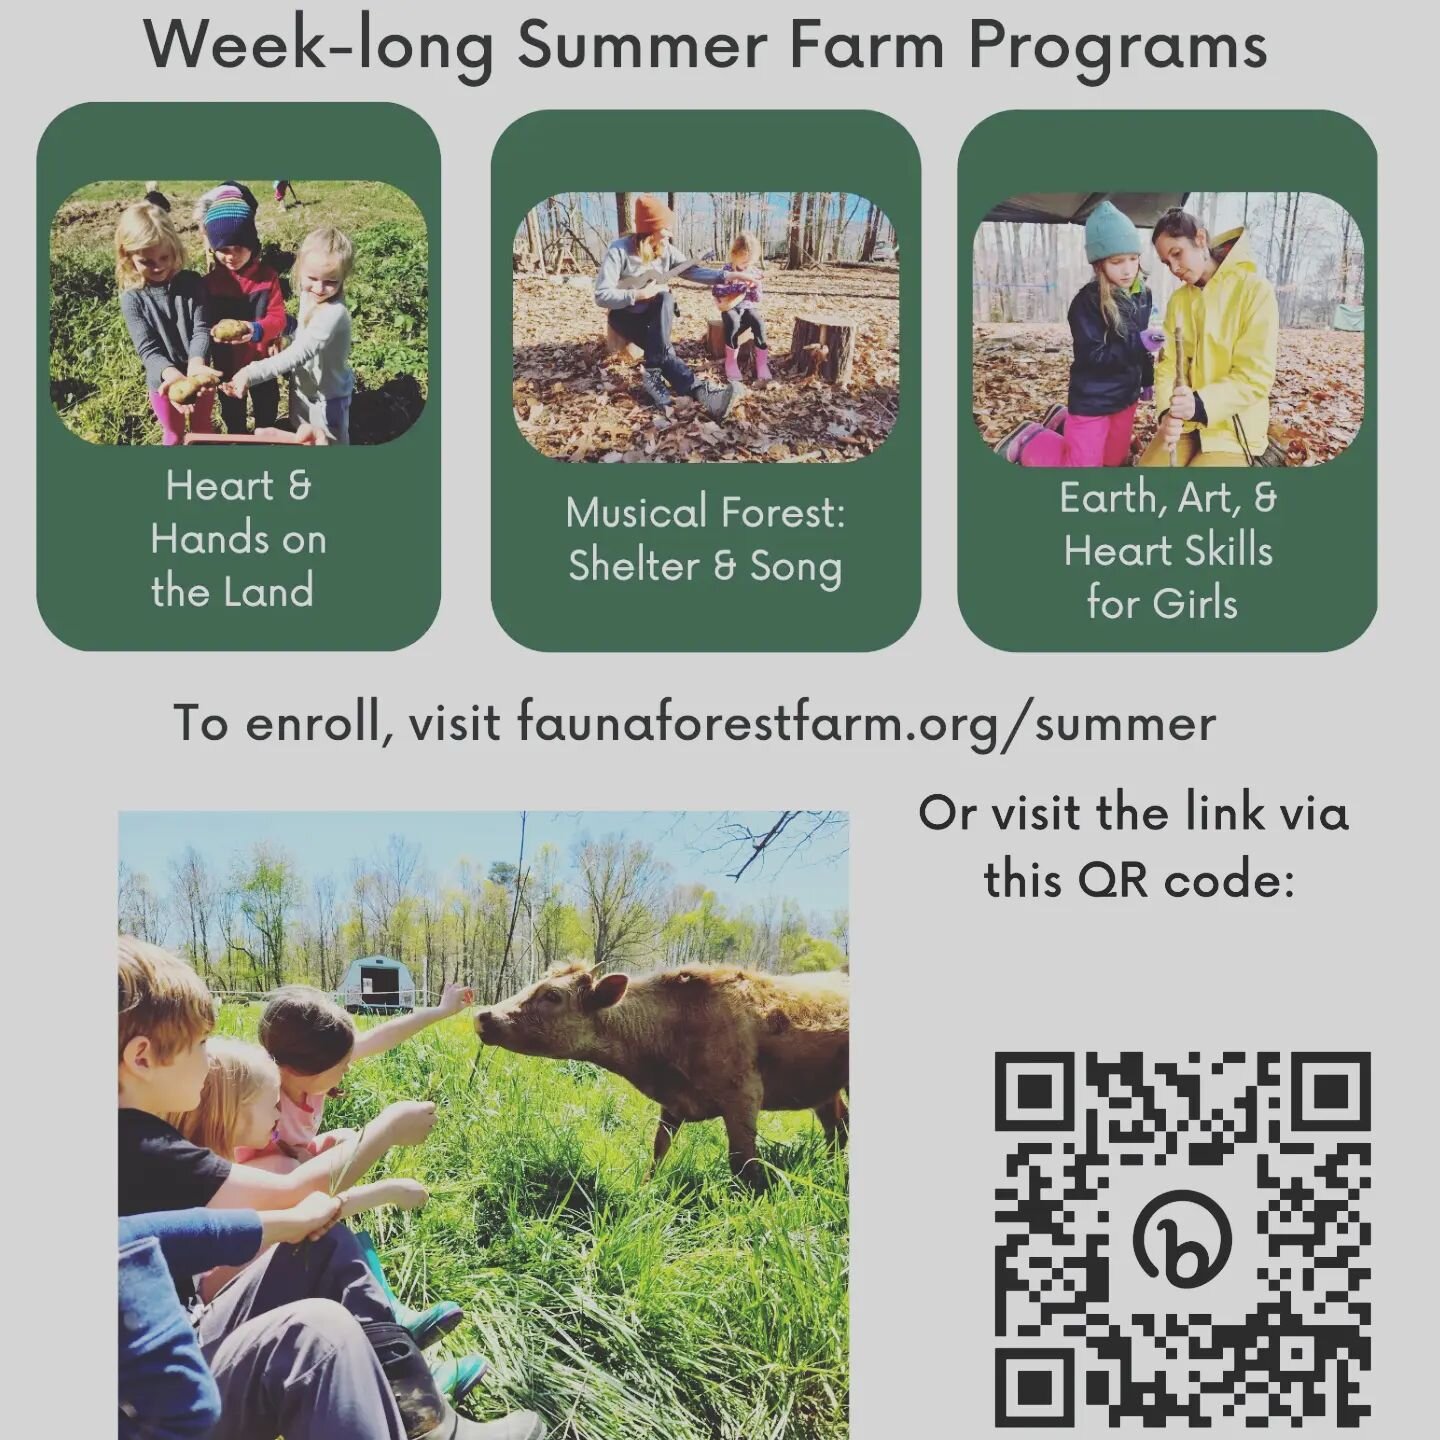 Register now to reserve a spot in summer program at The Earth School at Fauna Forest Farm!

Visit: www.faunaforestfarm.org/summer to register!